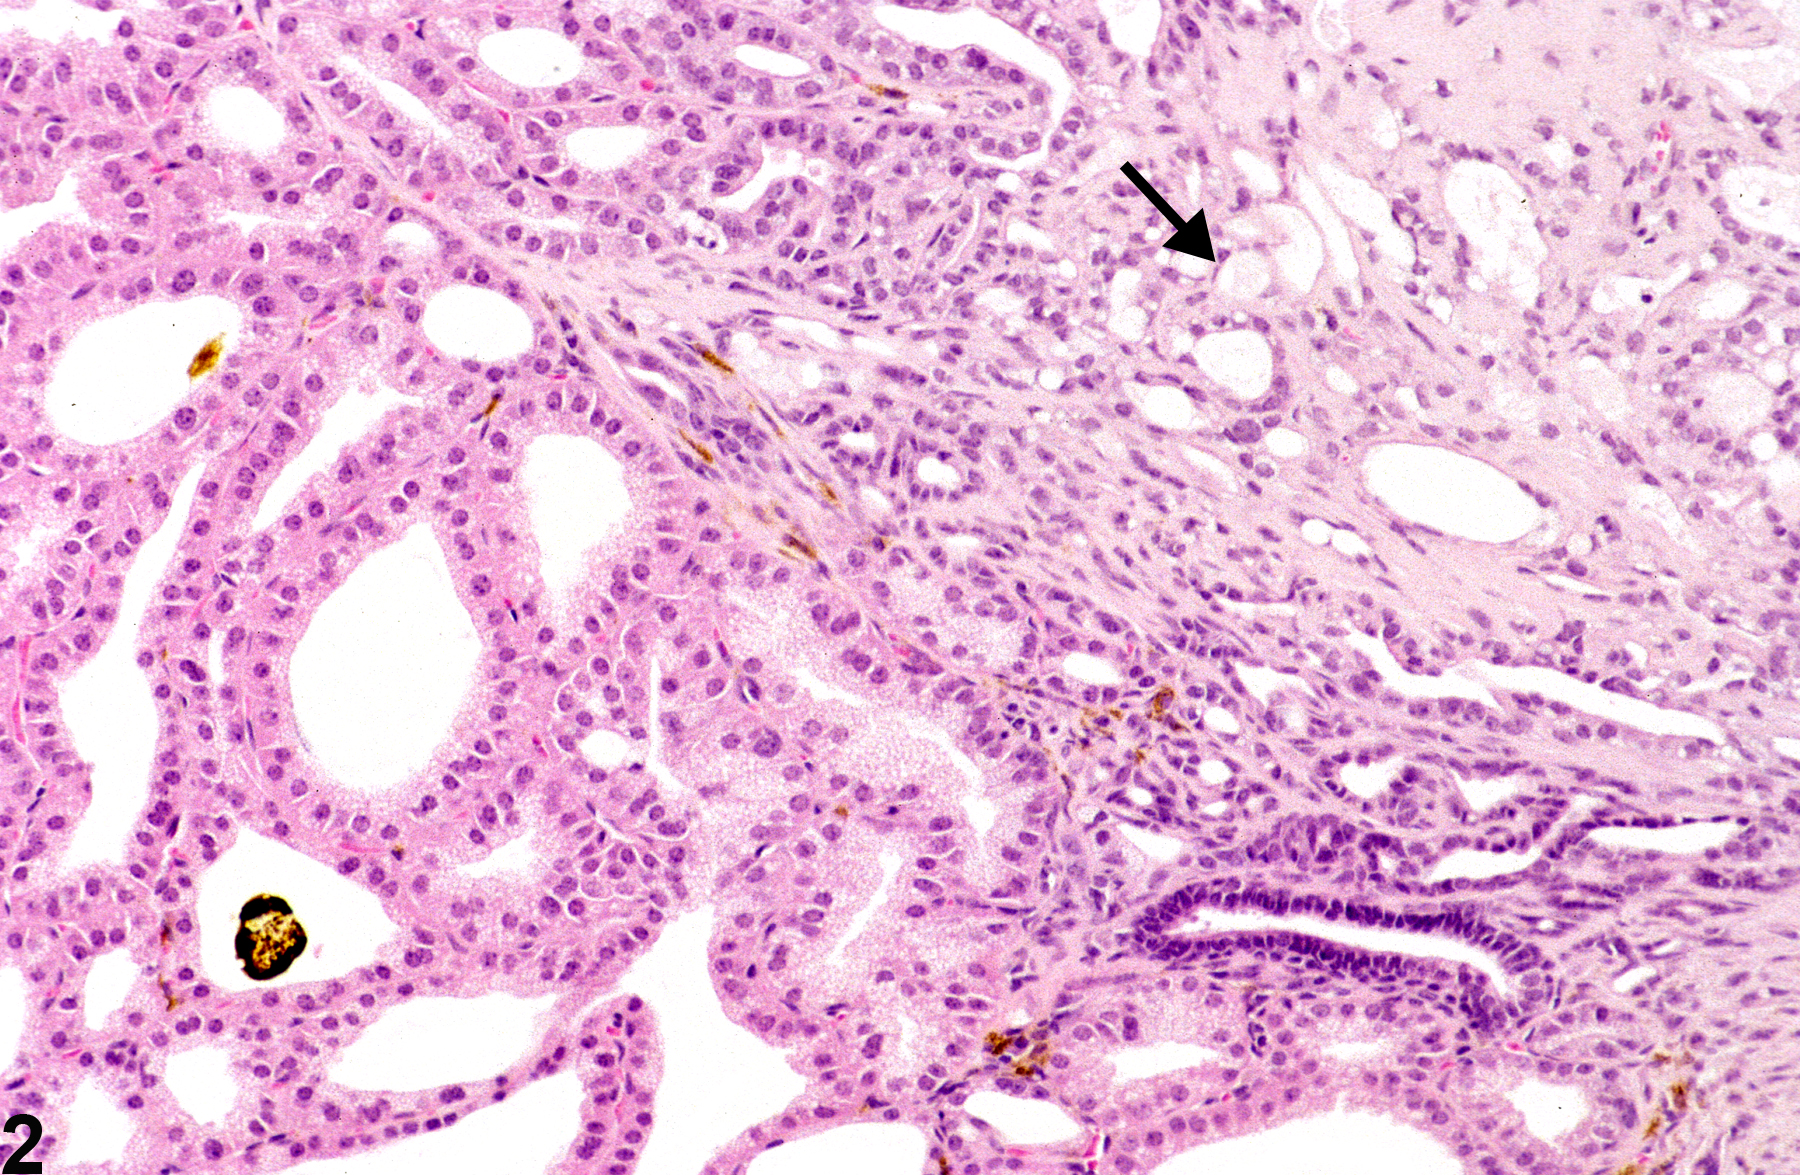 Image of atrophy in the Harderian gland from a female B6C3F1 mouse in a chronic study